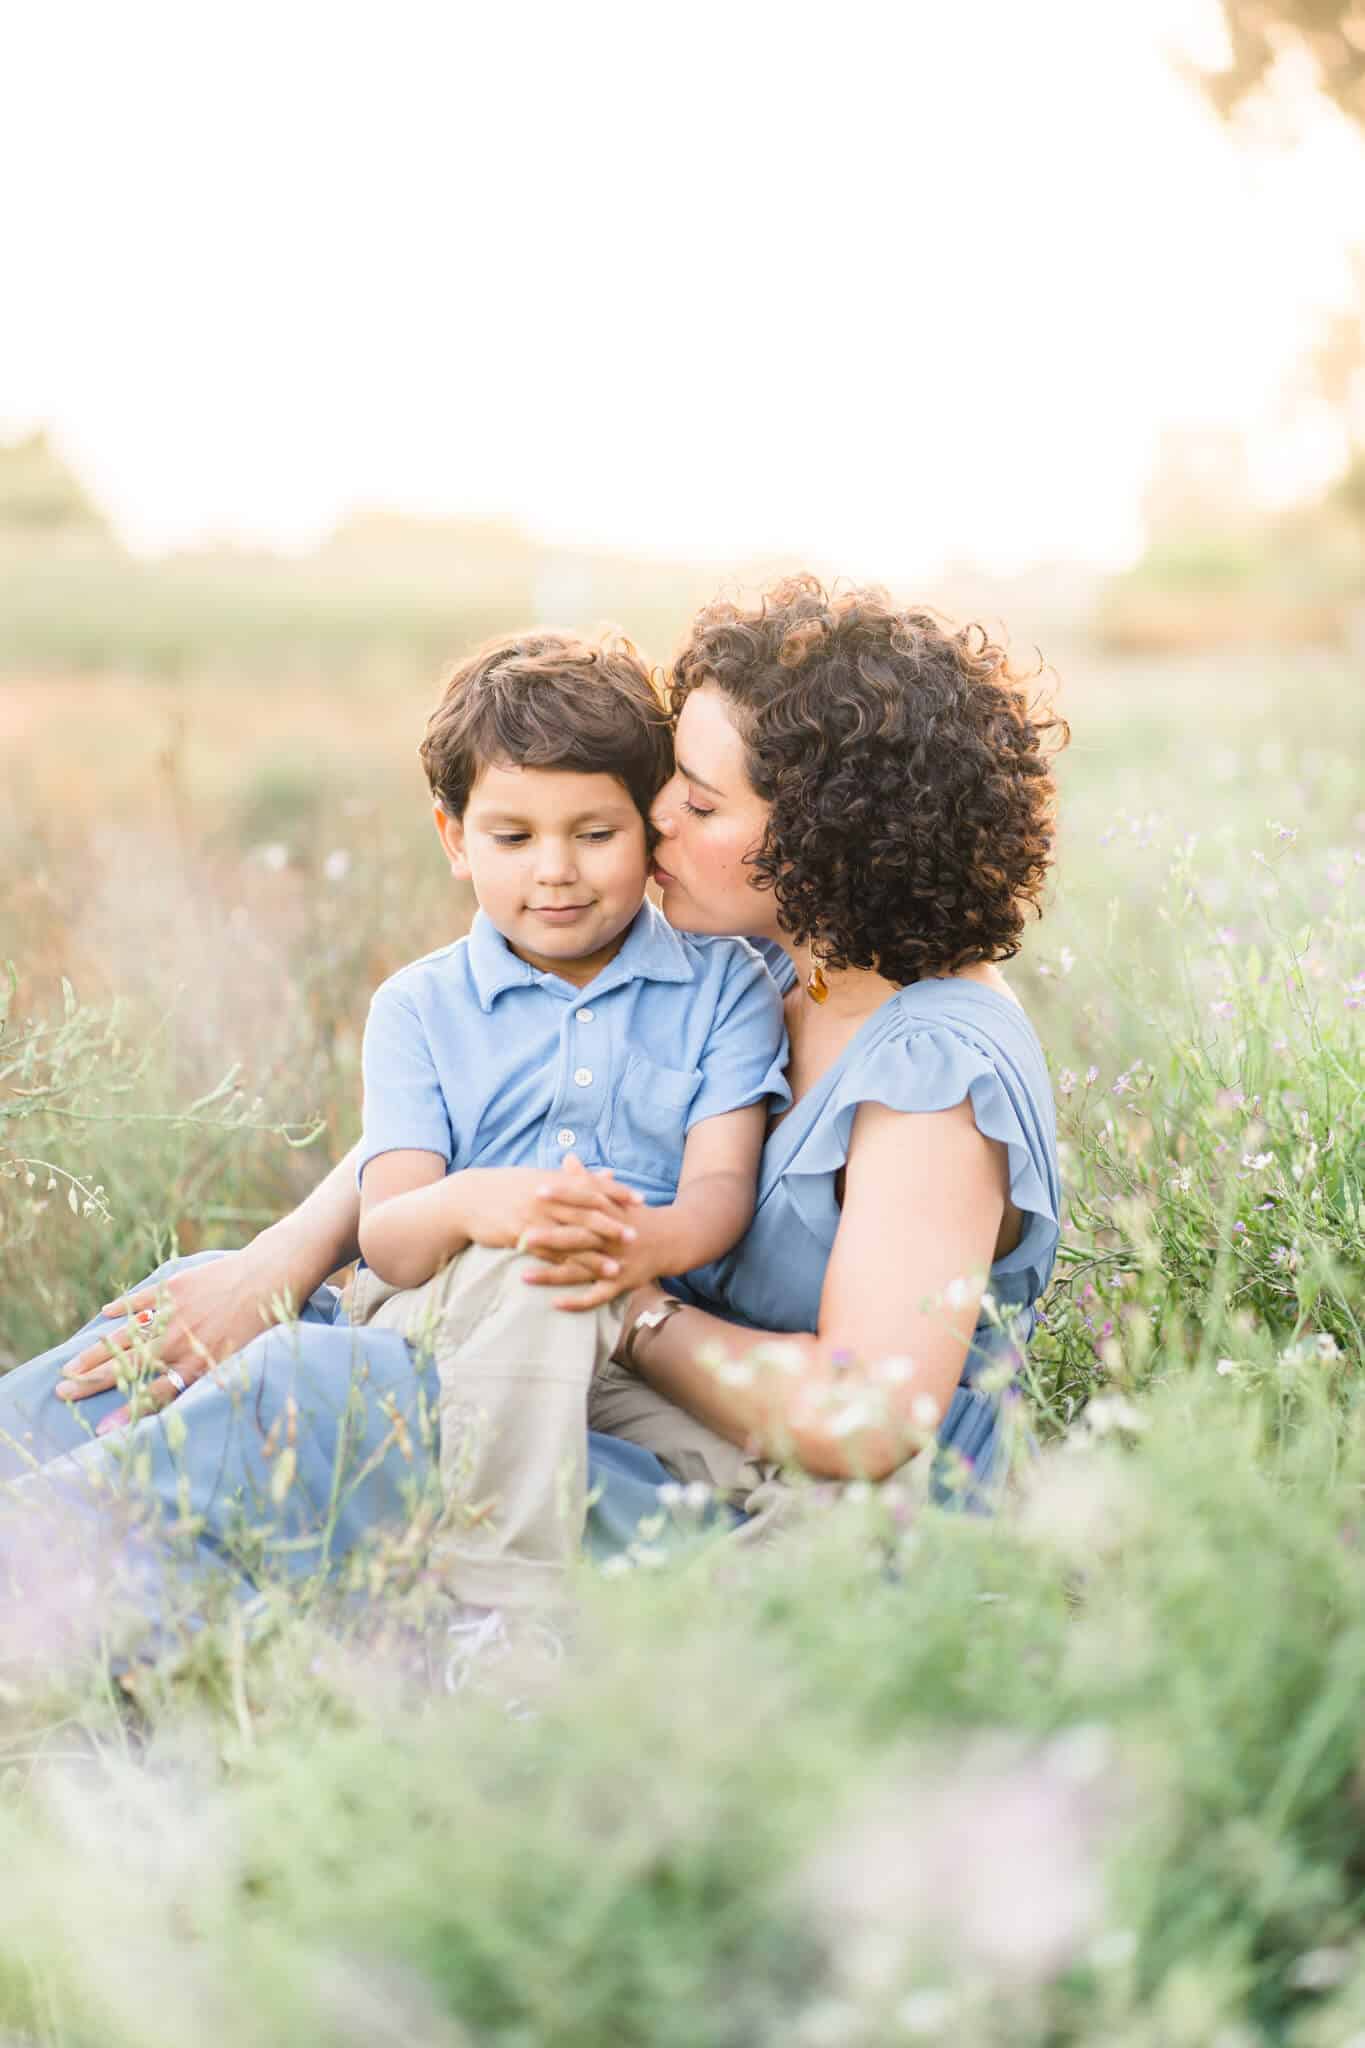 Mom kissing son in a field of grass